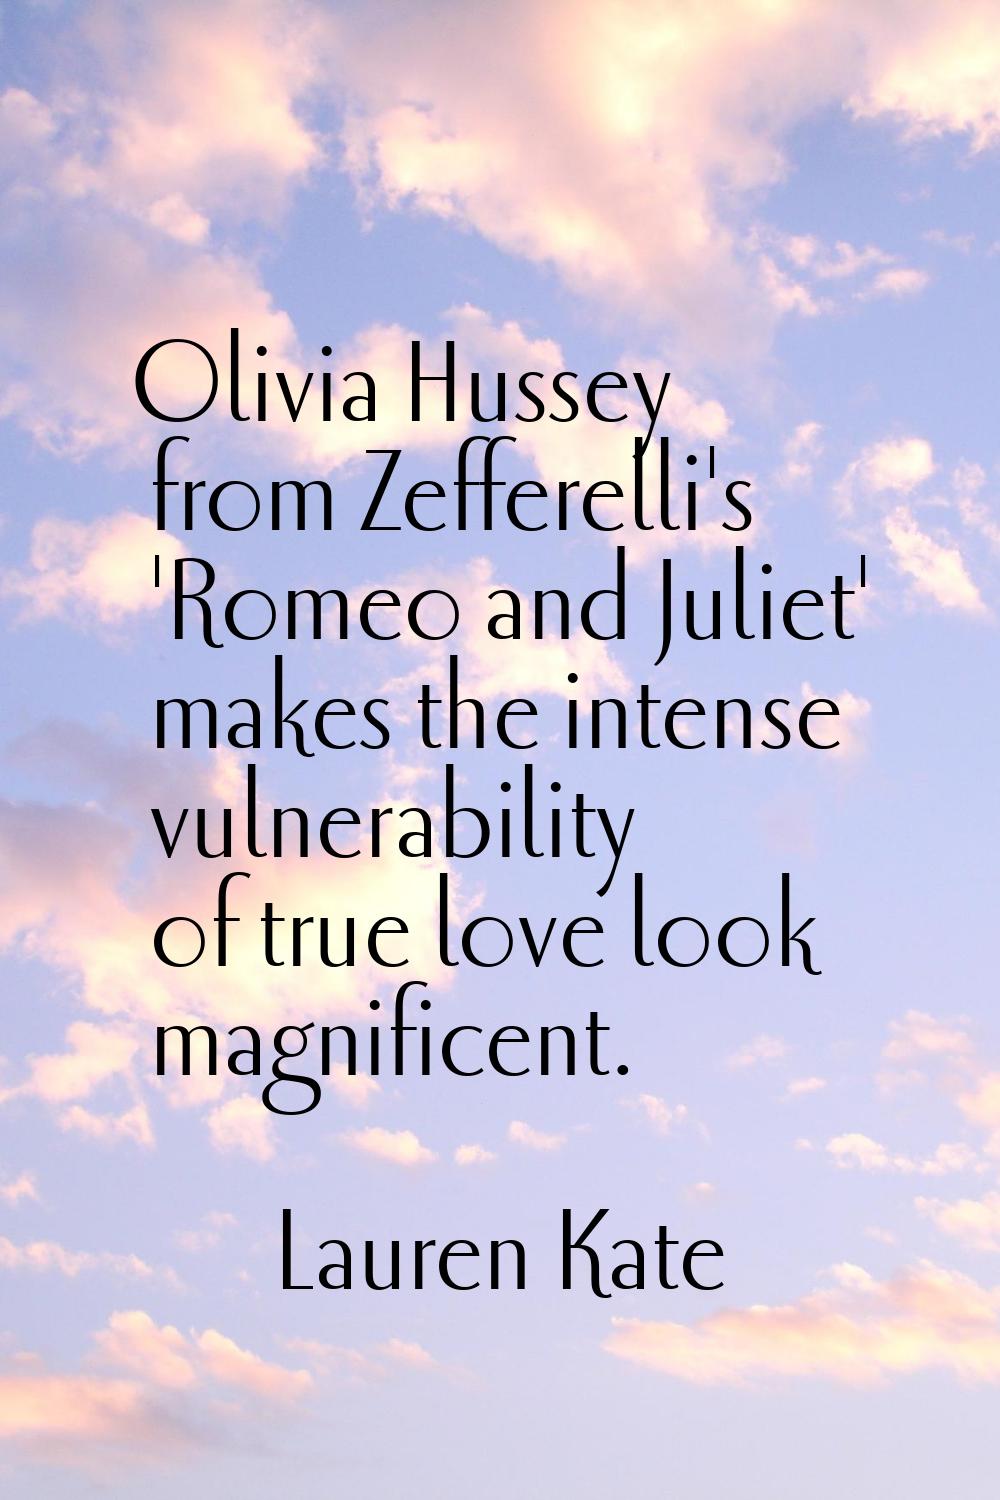 Olivia Hussey from Zefferelli's 'Romeo and Juliet' makes the intense vulnerability of true love loo